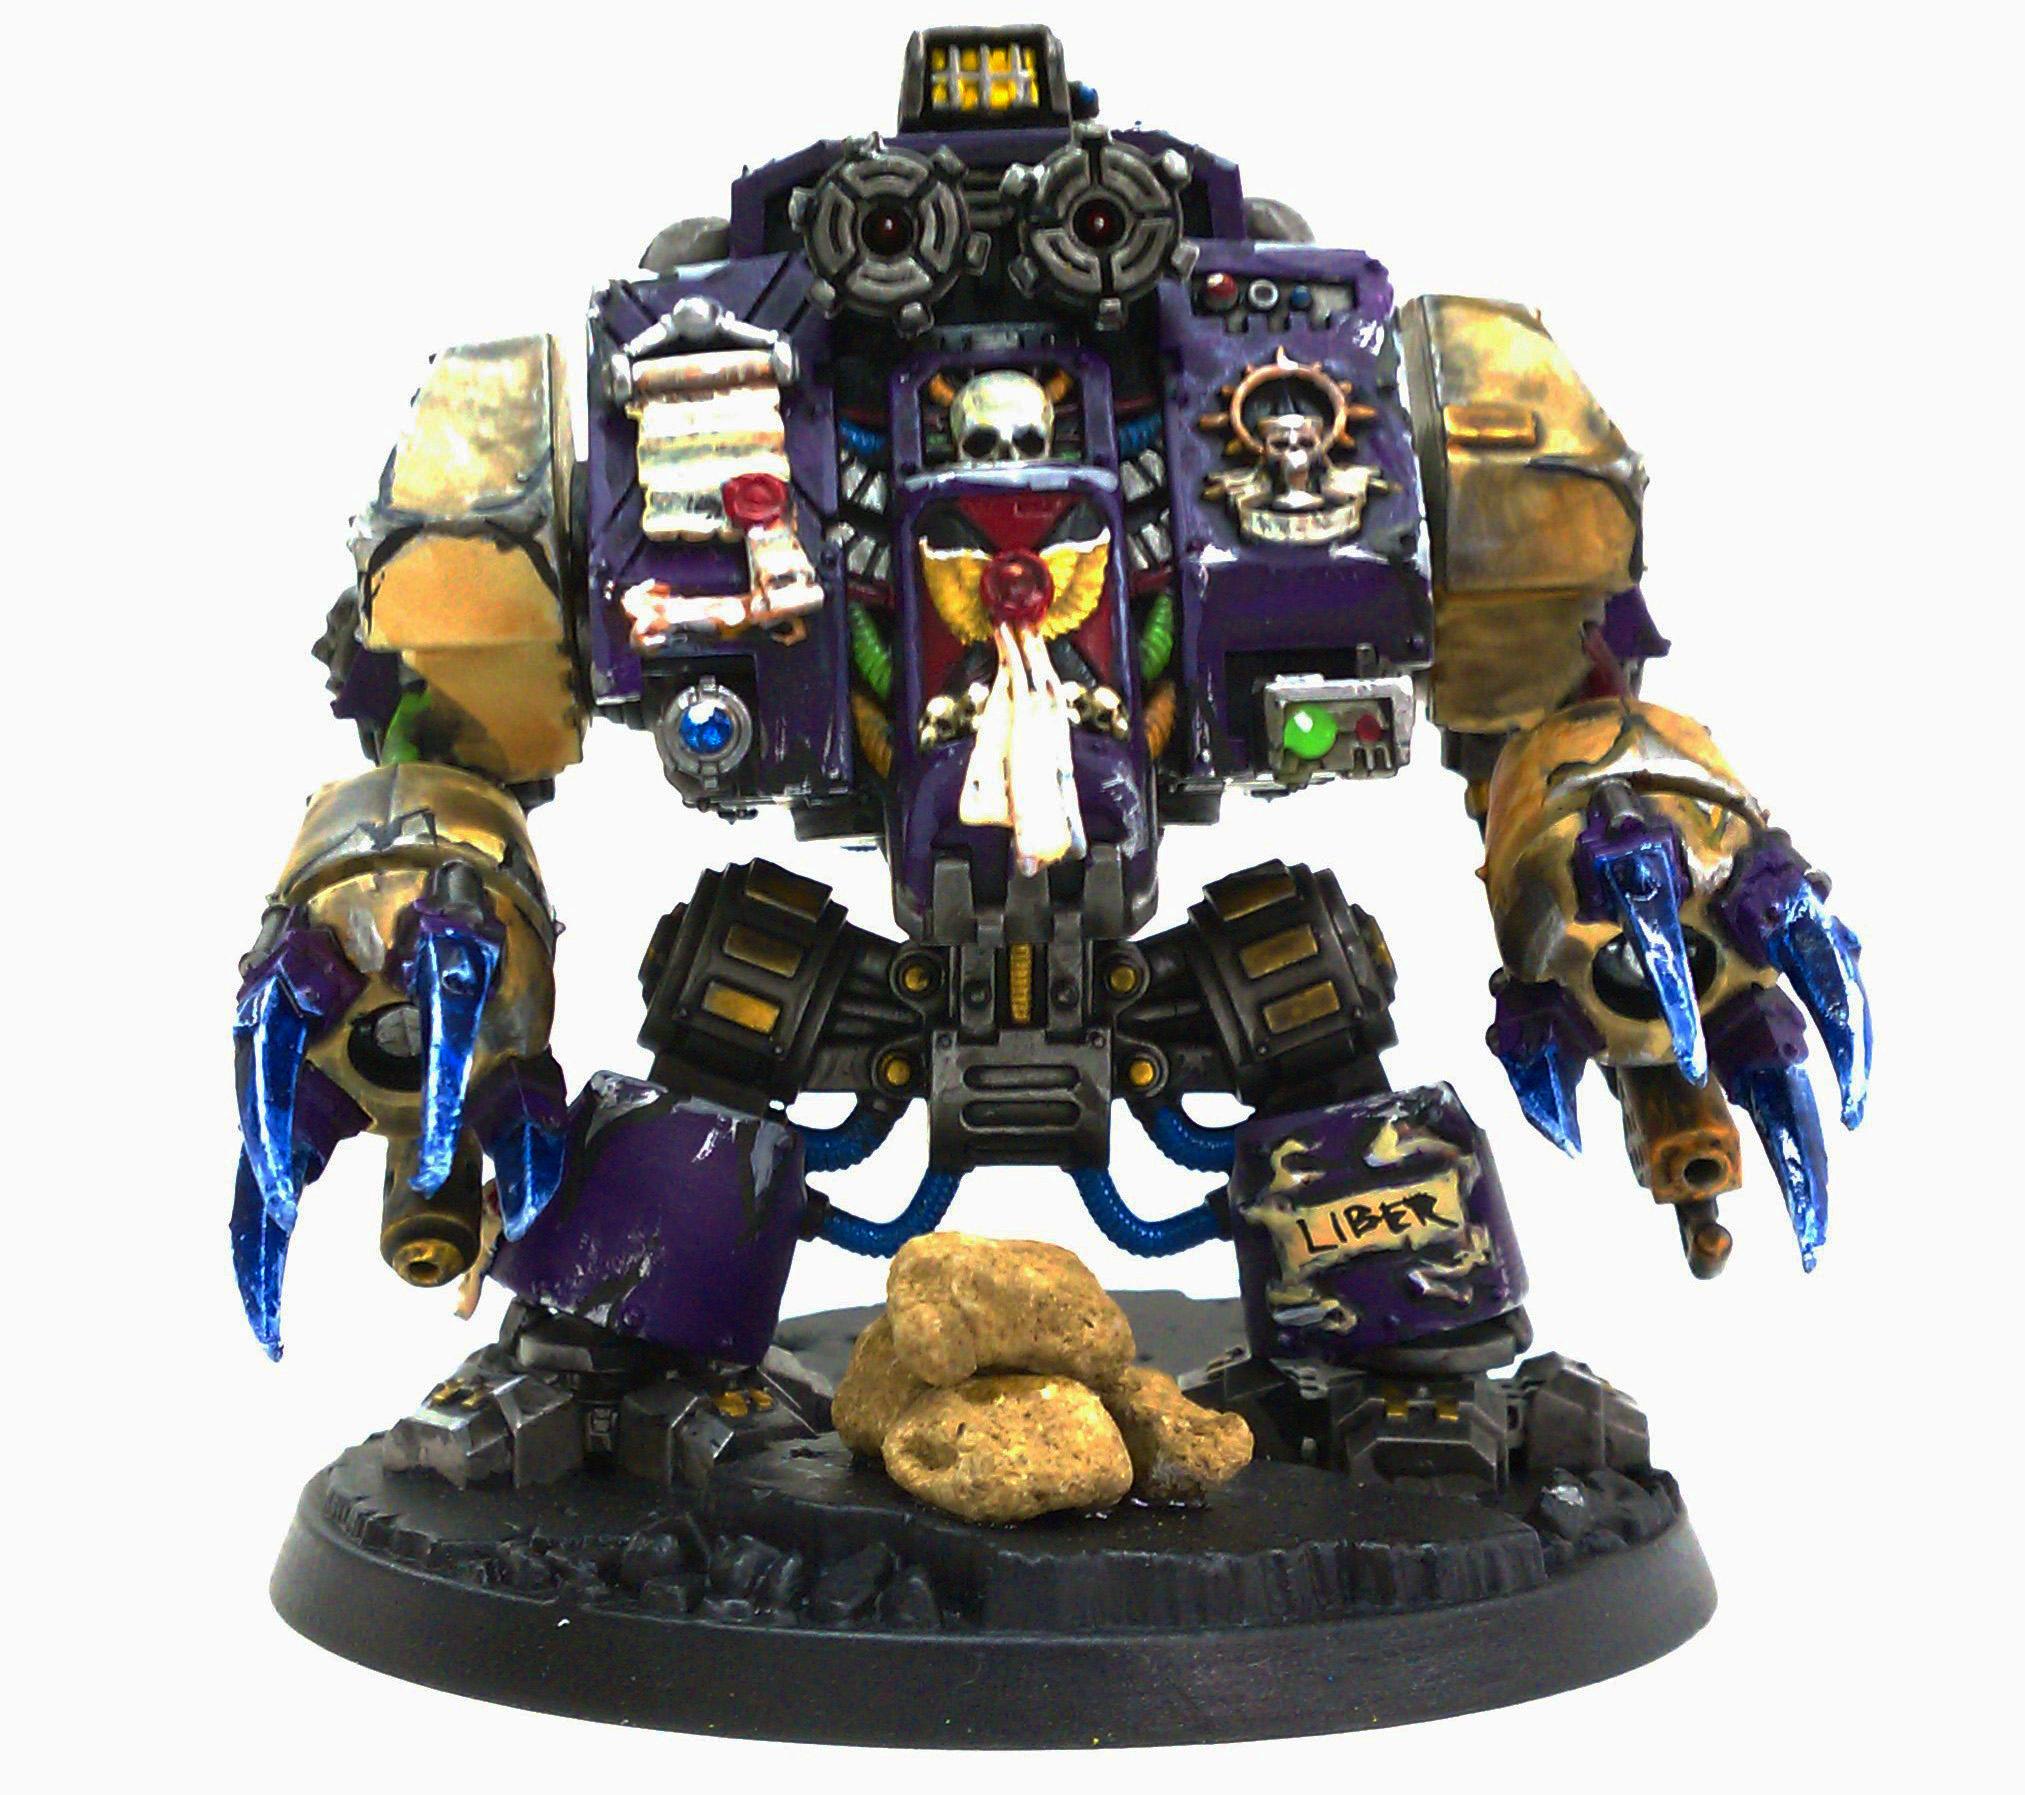 Chipped Metal, Death Company Dreadnought, Dreadnought, Purple, Souldrinker, Souldrinkers, Space Marines, Warhammer 40,000